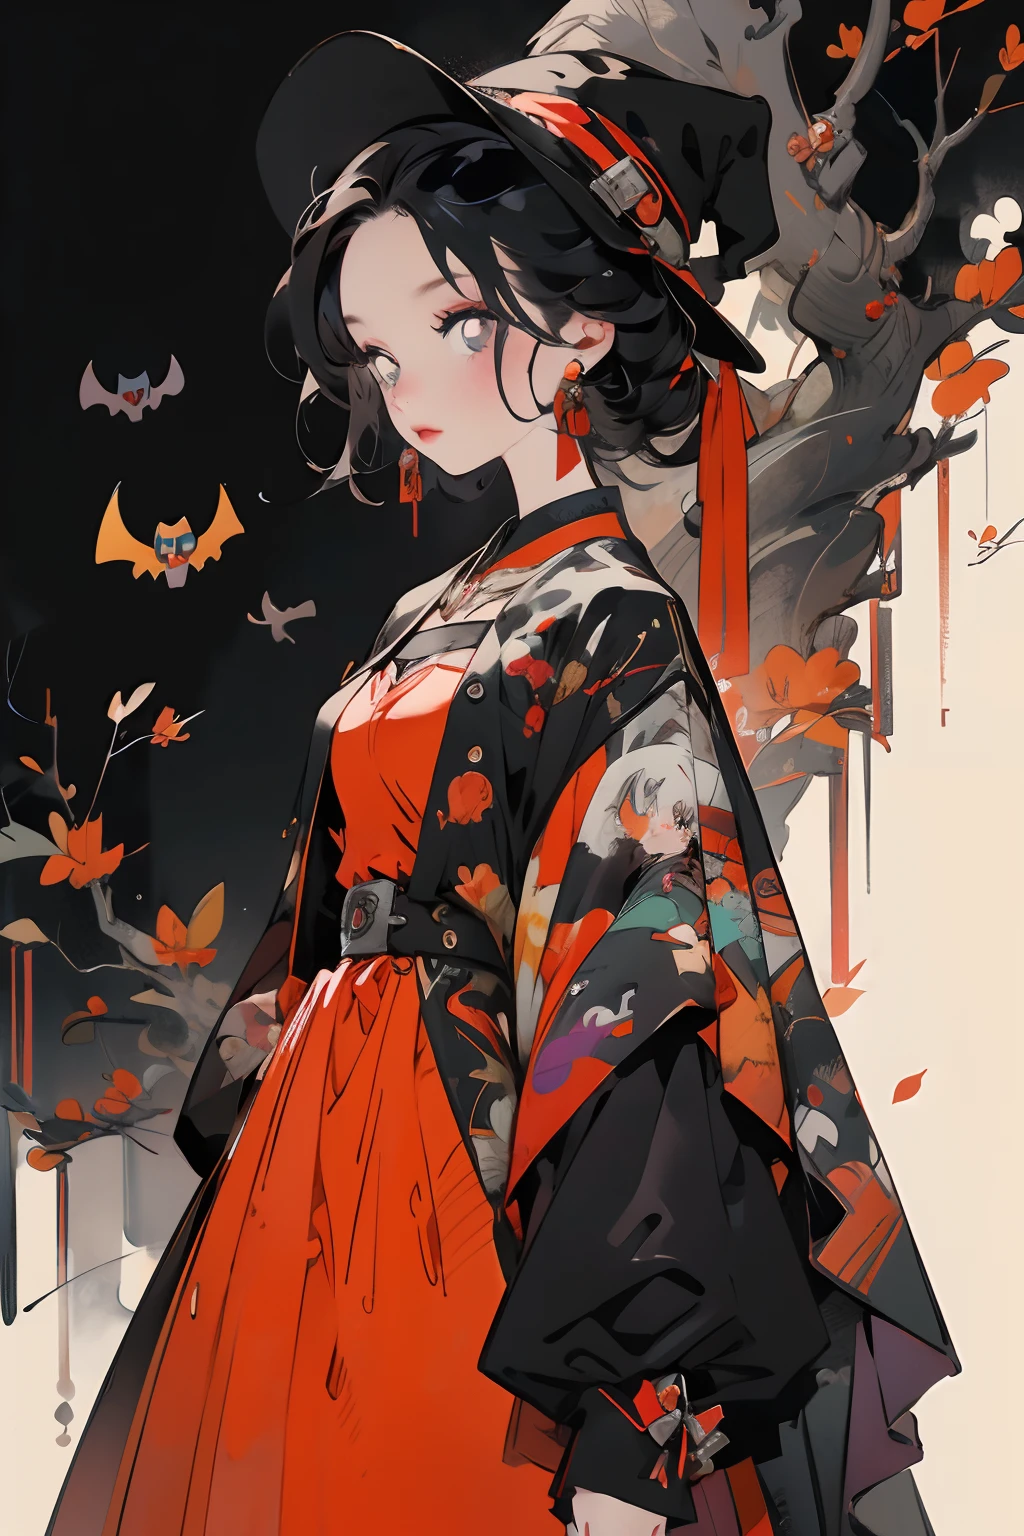 in a red dress，Anime girl in black cape and black hat, style of anime4 K, in a halloween style, gothic maiden anime girl, Kawasi, cute anime waifu in a nice dress, Anime art wallpaper 8 K, 🍂 Cute, Badass anime 8 K, Best anime 4k konachan wallpaper, halloween art style, Anime art wallpaper 4k